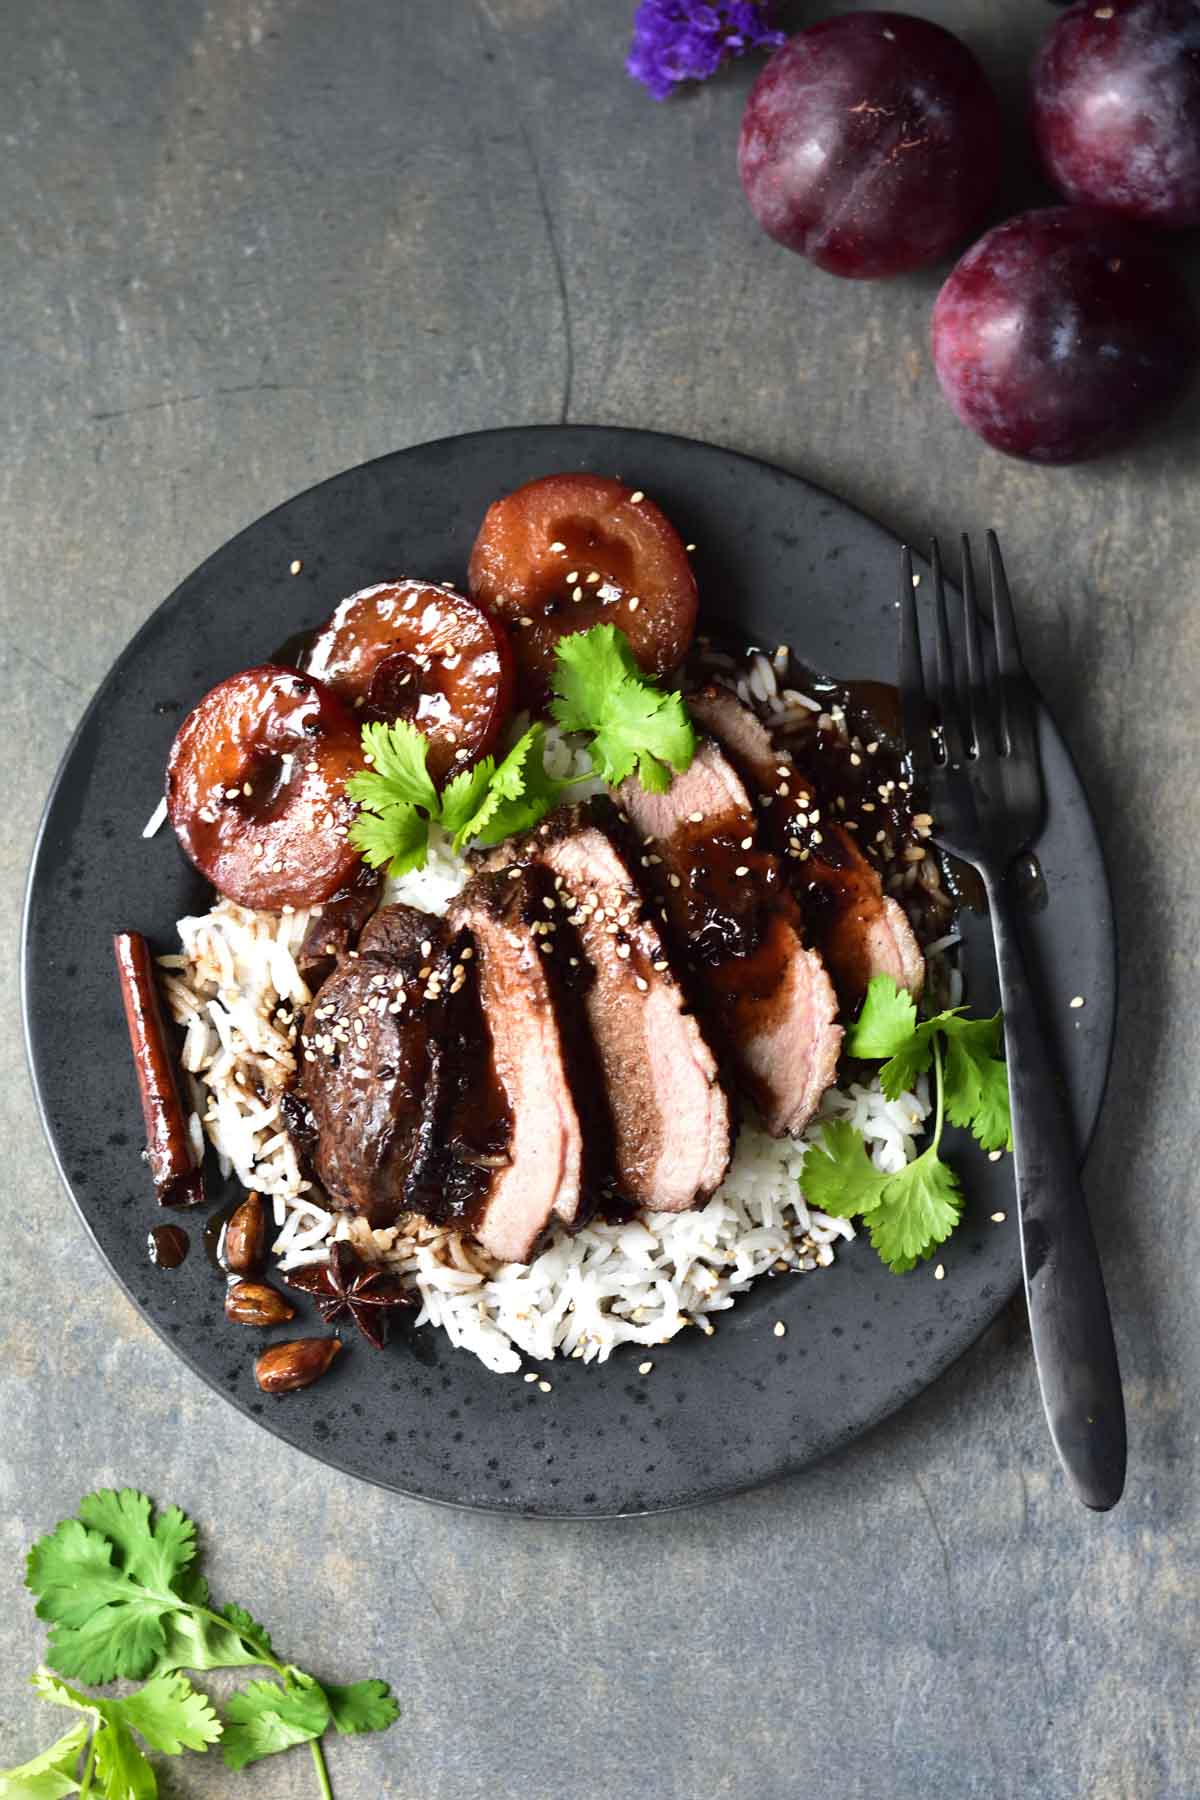 Slow-roasted duck breast with plum sauce – tender and juicy